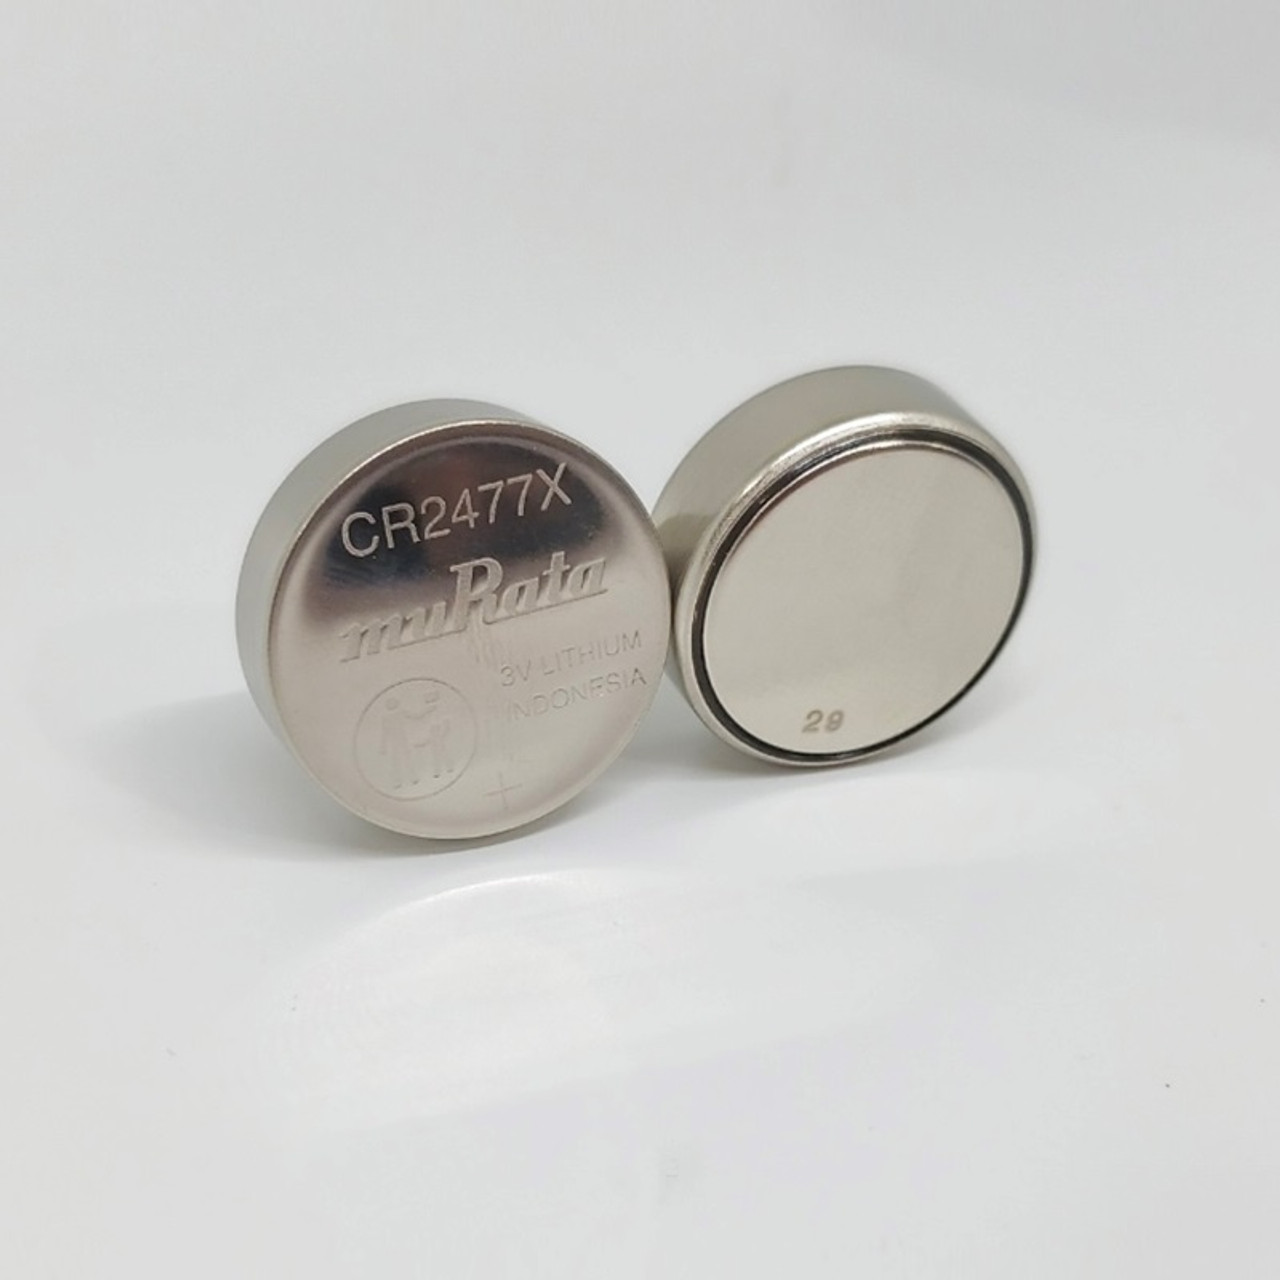 Of 100 CR2477 3V Lithium Button 1inch Coin Cells From Eastred, $59.64